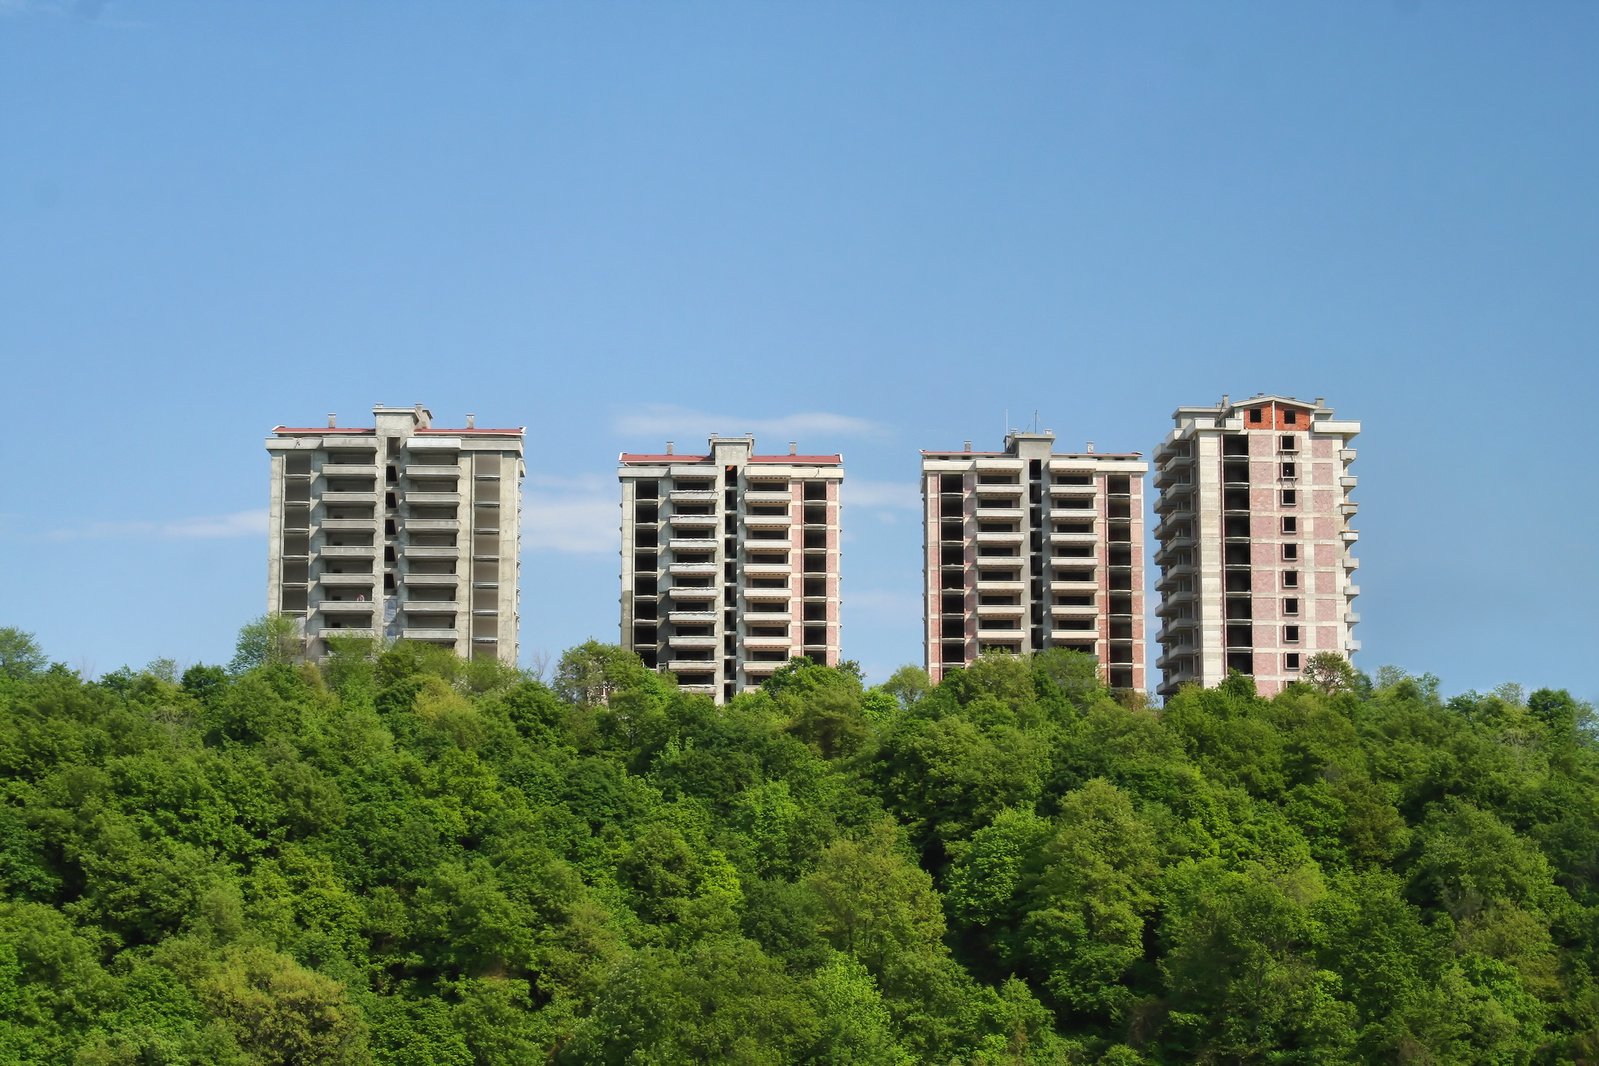 several apartment buildings perched on the top of trees